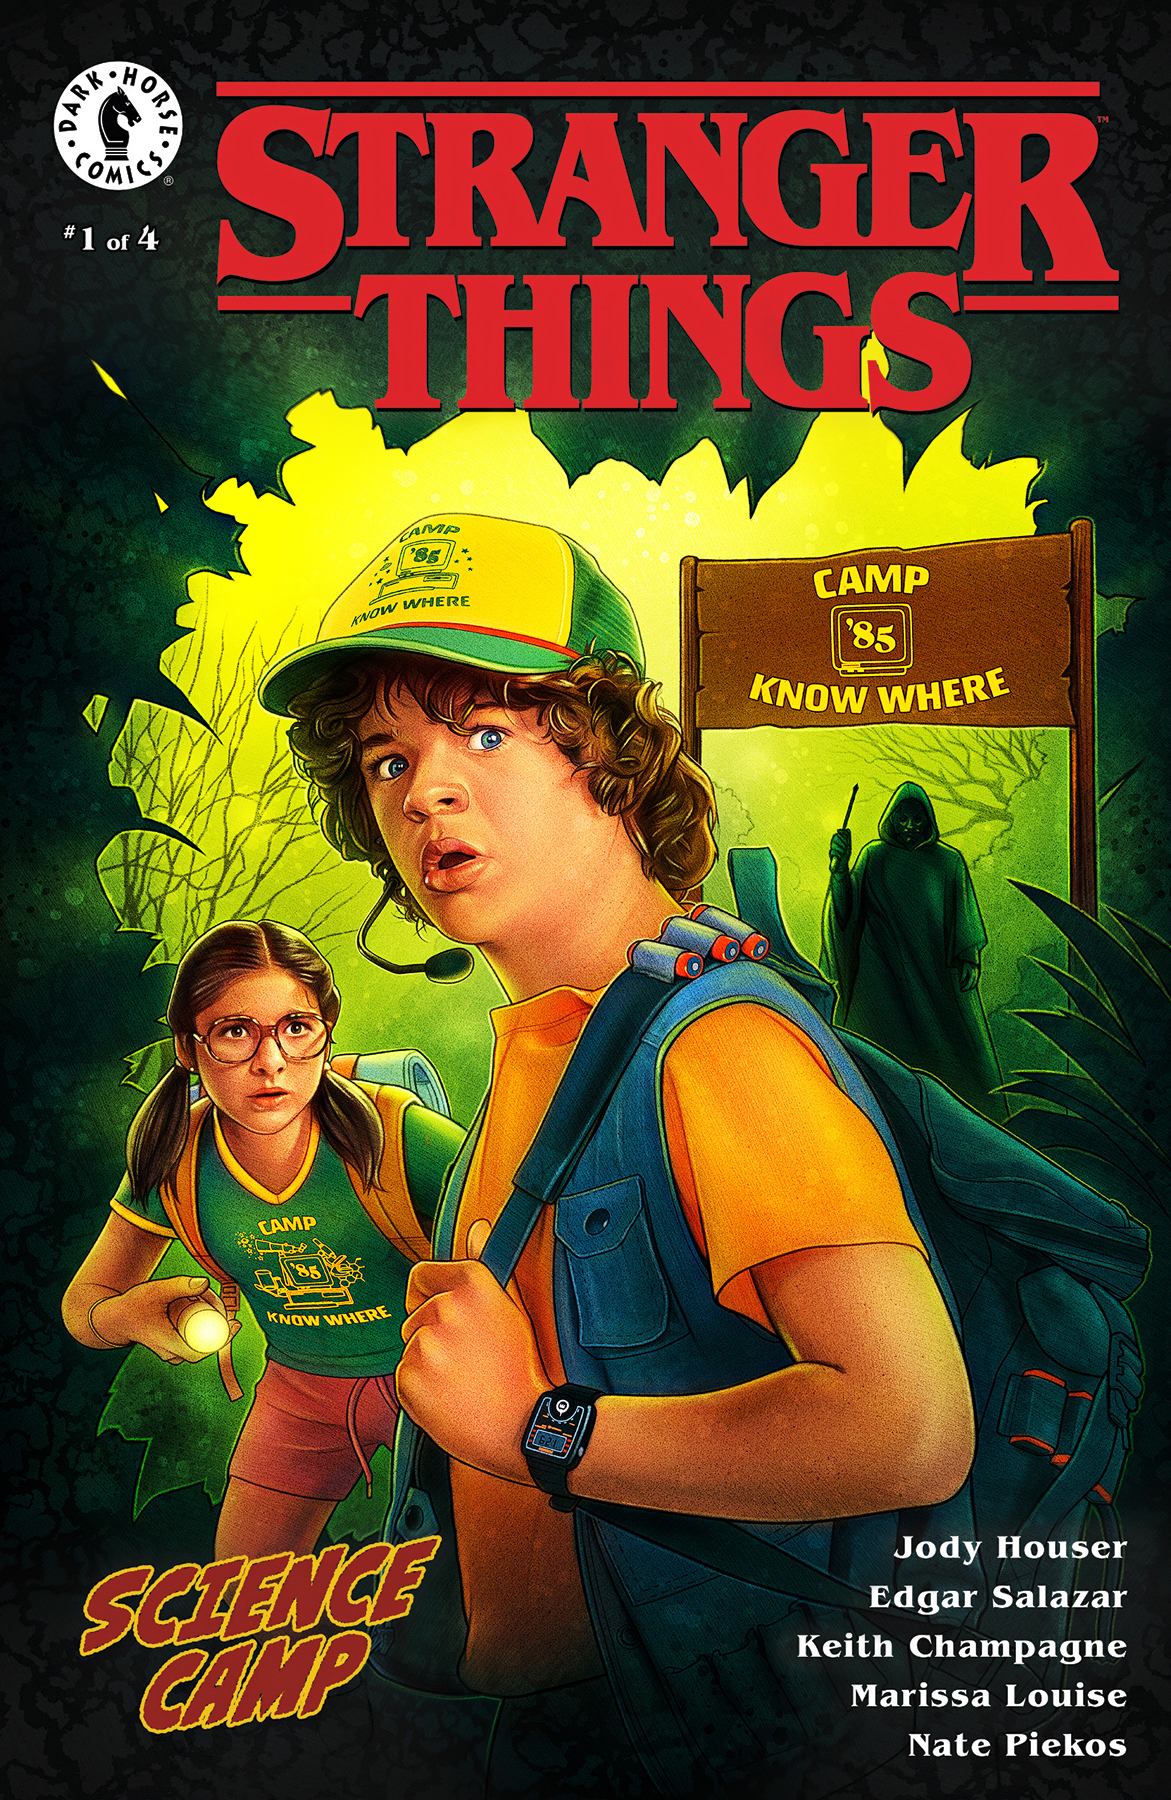 Stranger Things - Science Camp - Series 4 Variant Cover